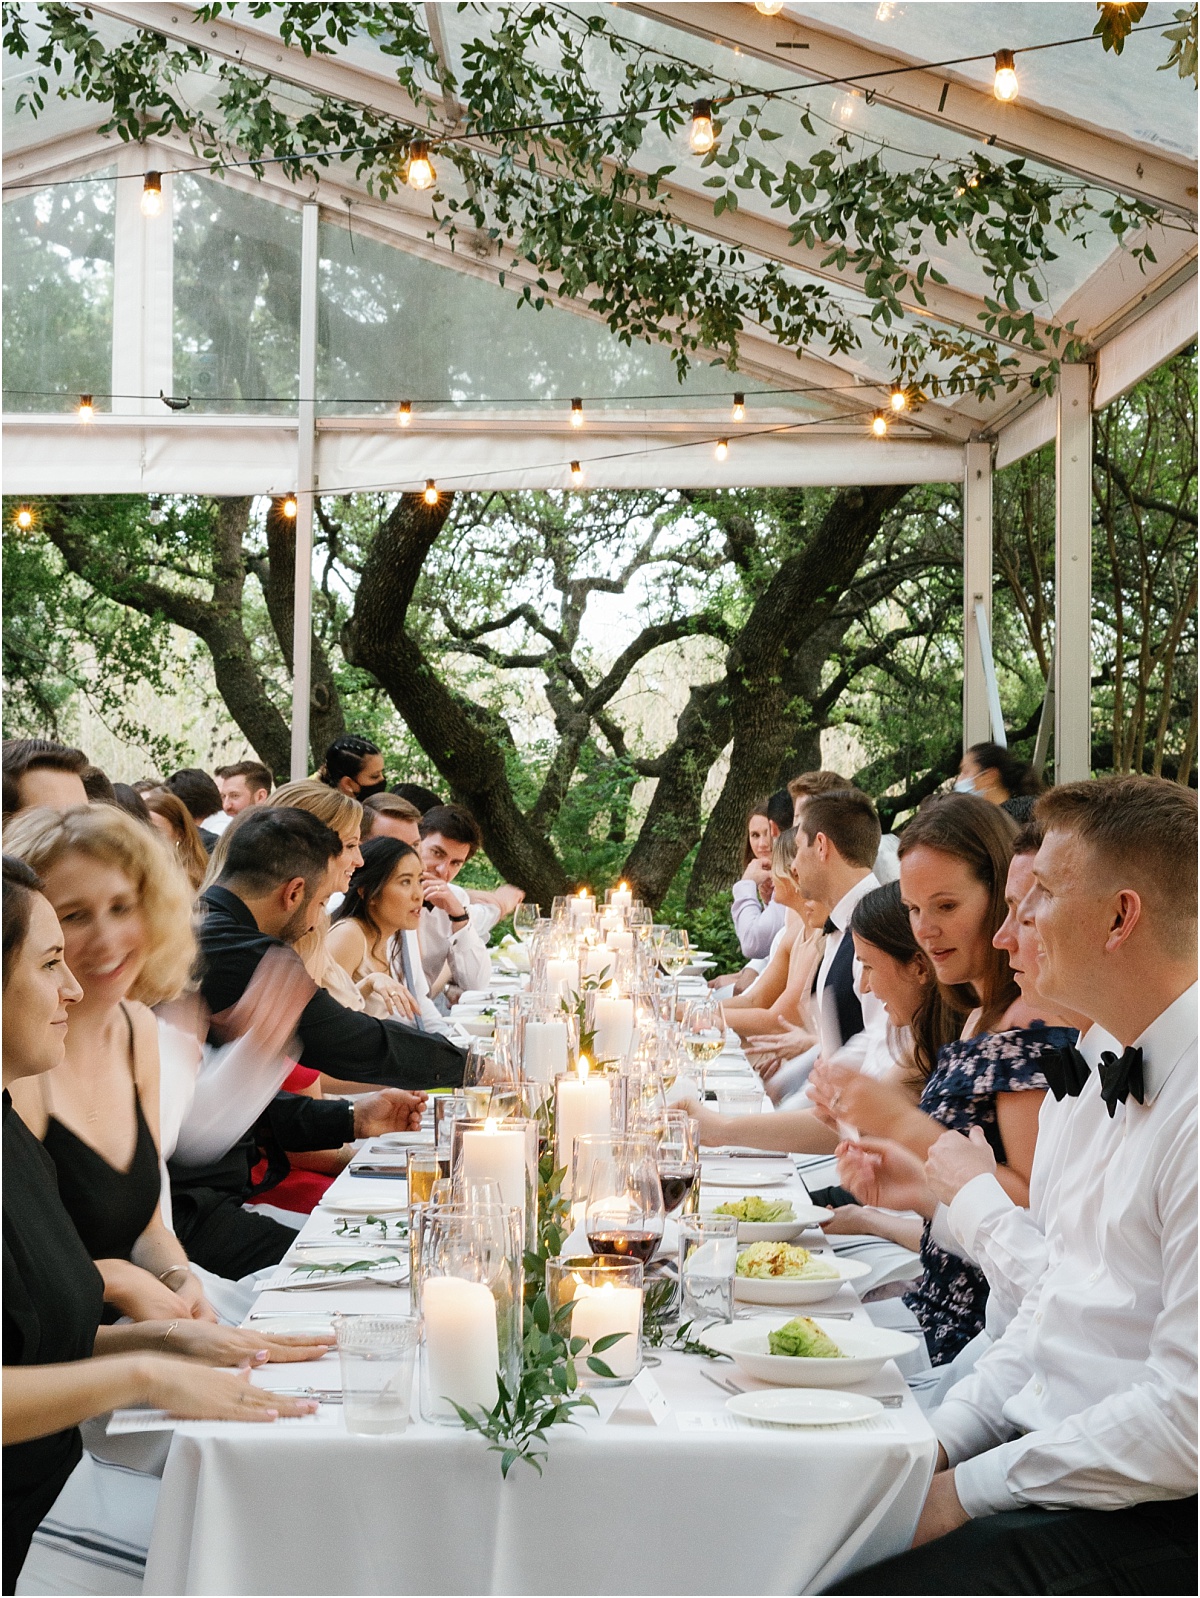 People during an al fresco dinner at a wedding reception. 